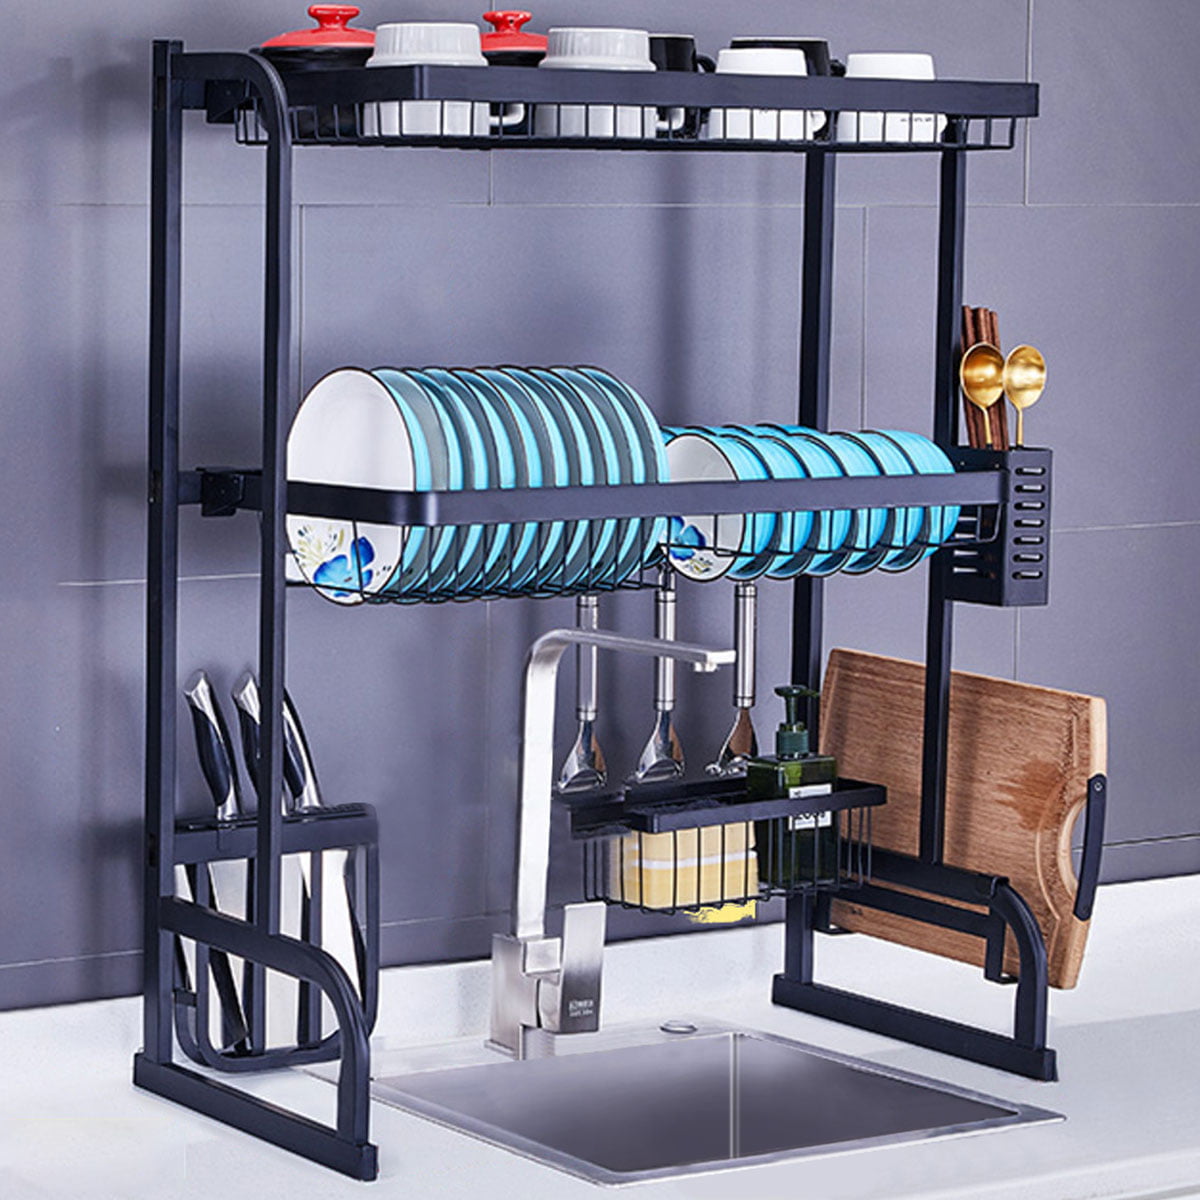 Details about   2-Tier Stainless Steel Kitchen Shelf Dish Drying Rack Storage Tableware Stand 